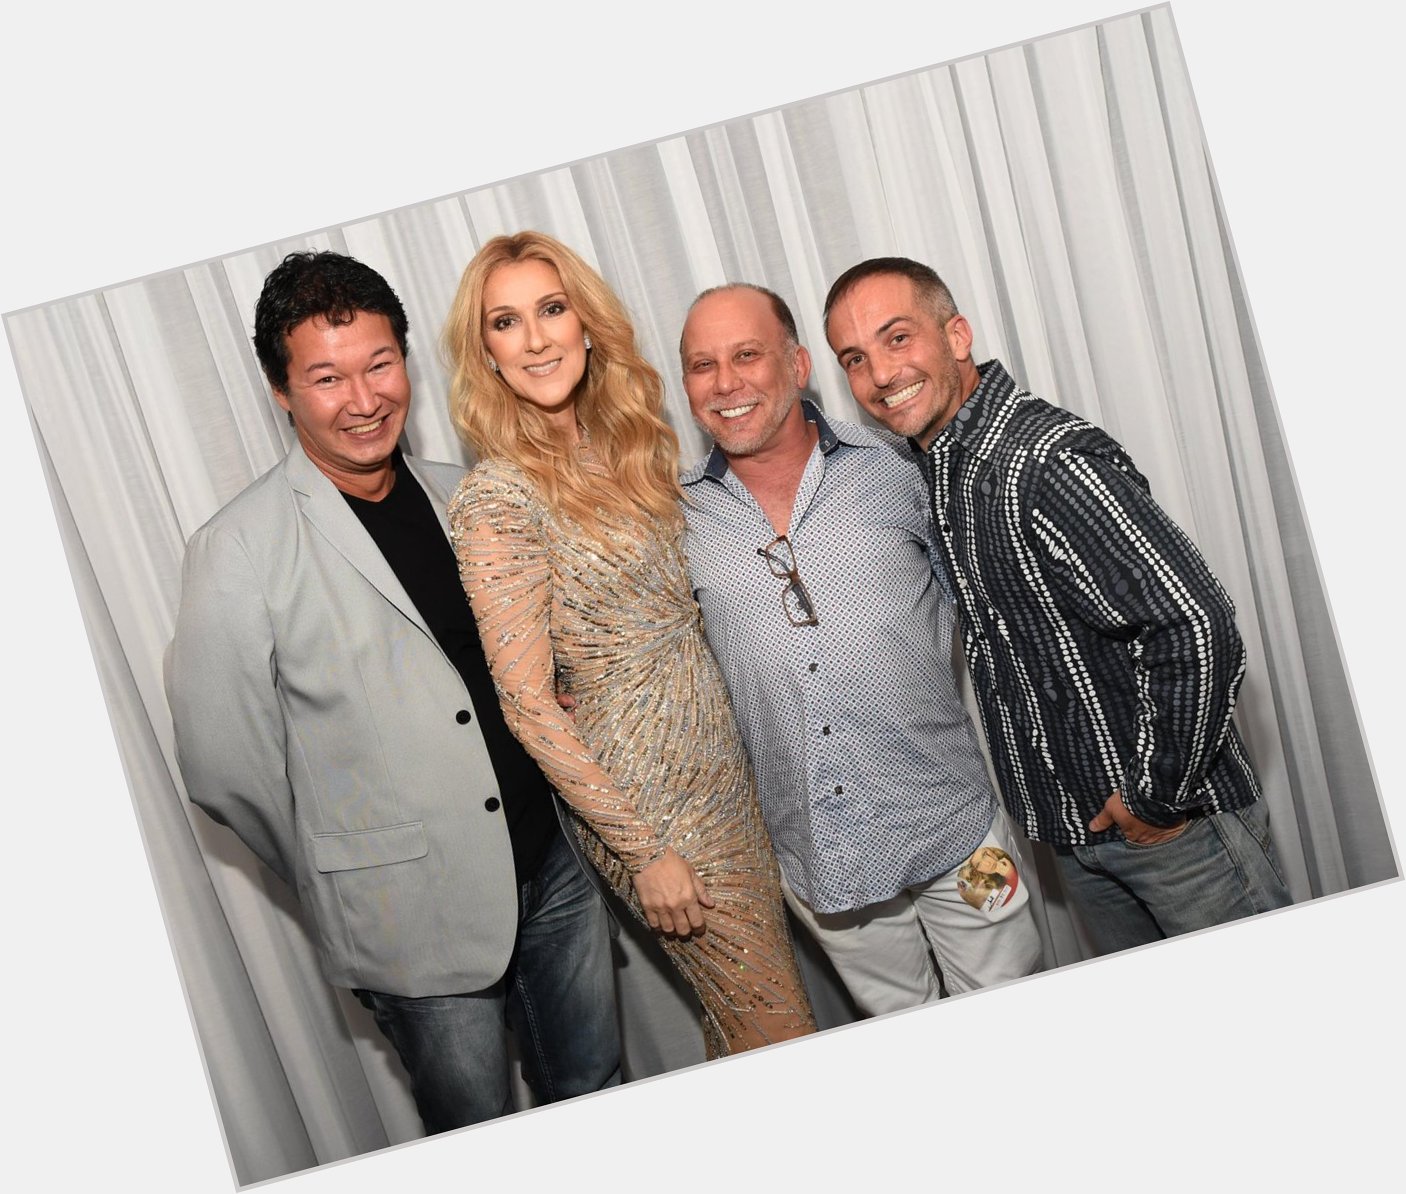 Happy Birthday to the legendary Celine Dion! Our heart will go on thanks to the power of her amazing music. 